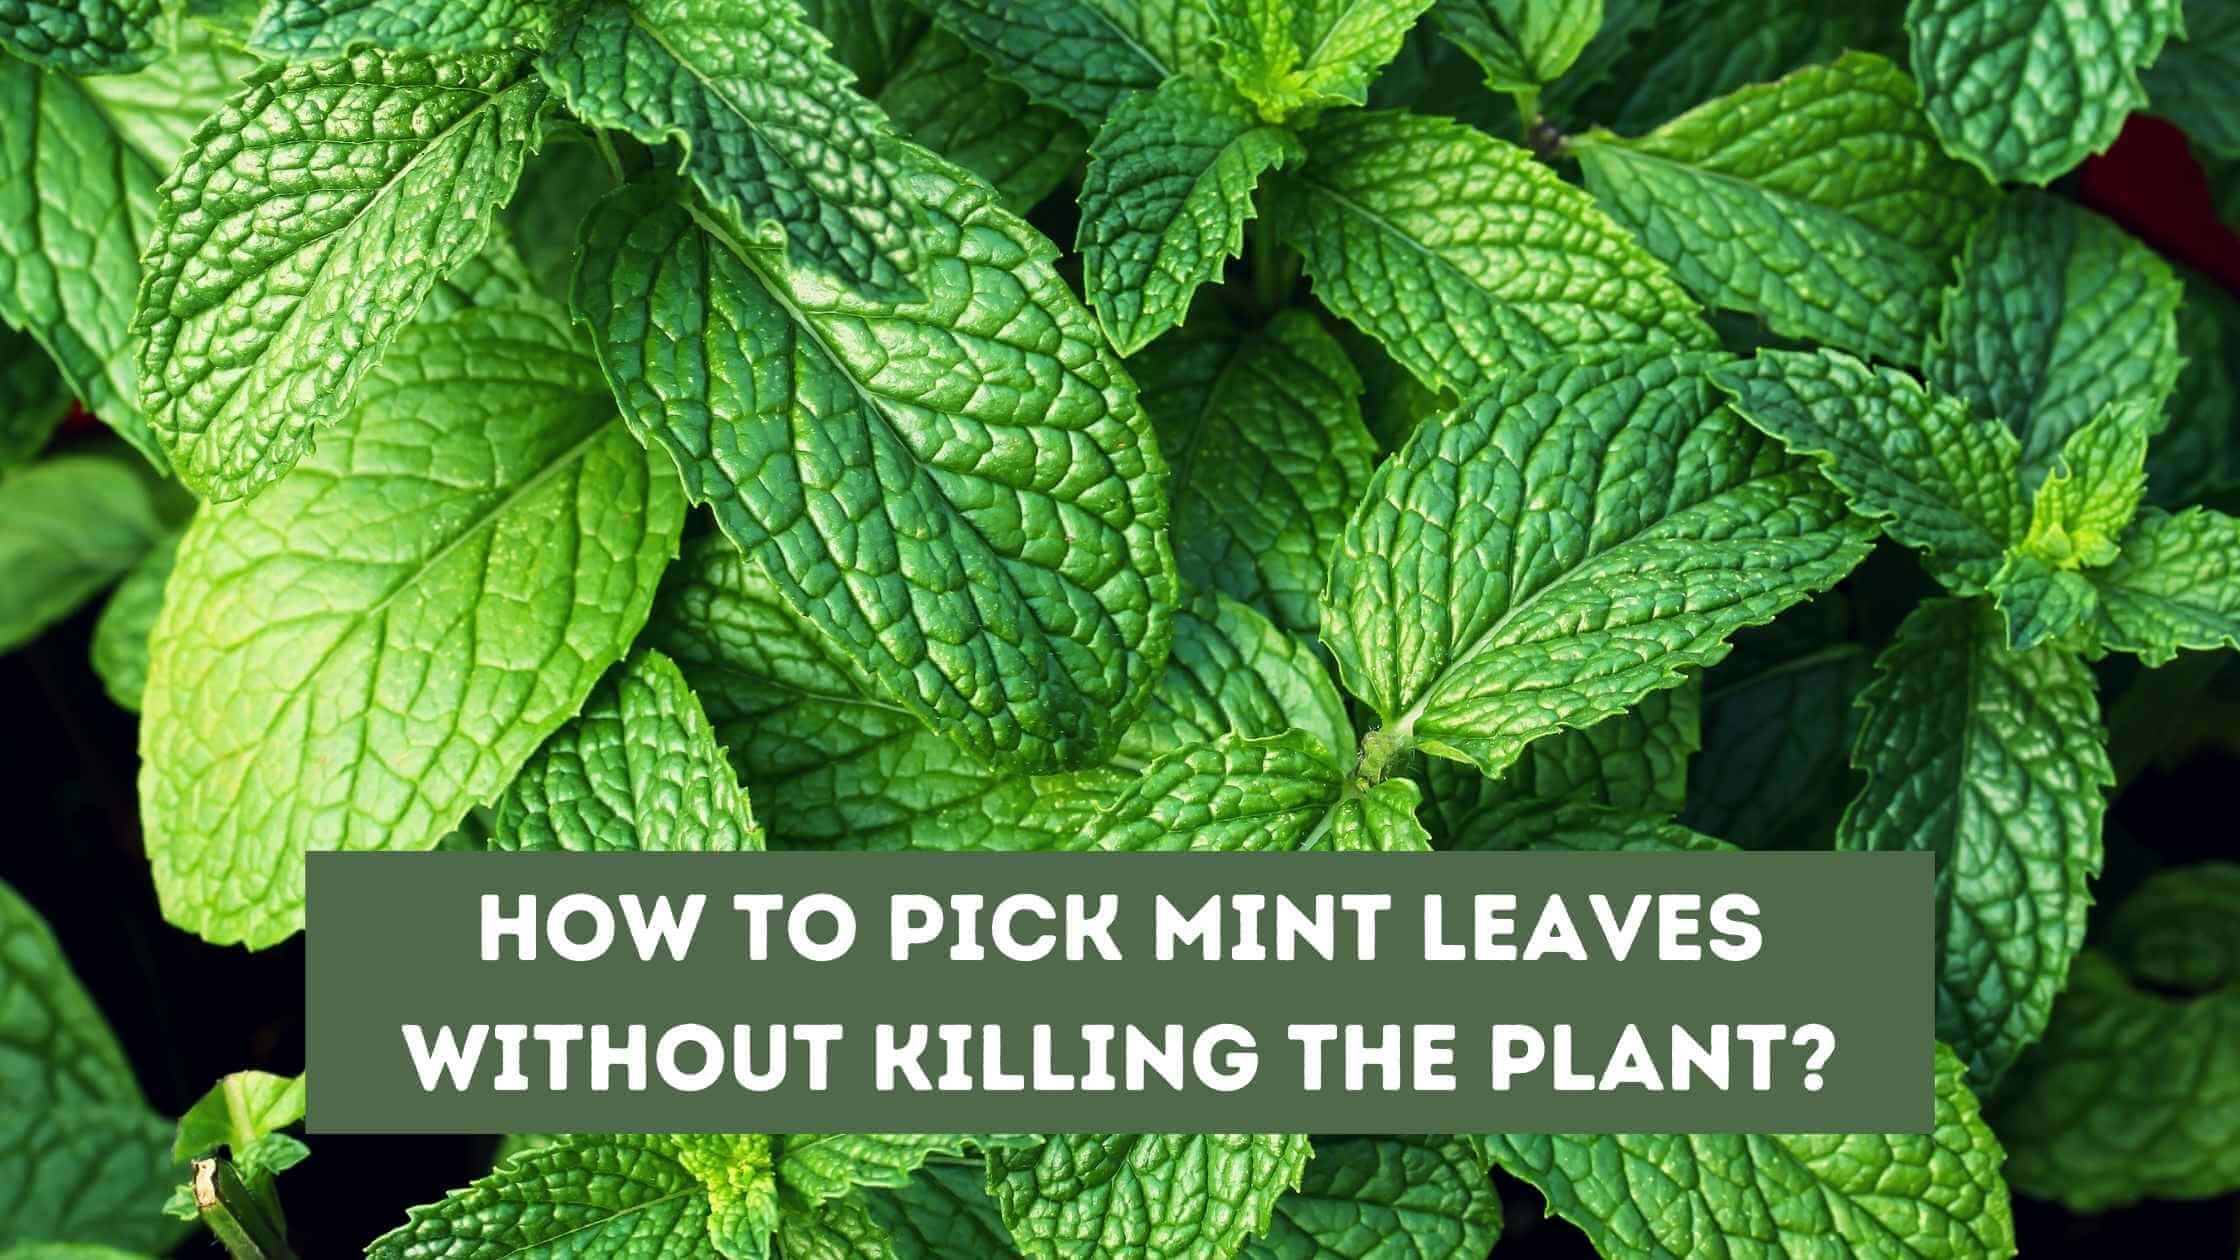 How to Pick Mint Leaves Without Killing the Plant